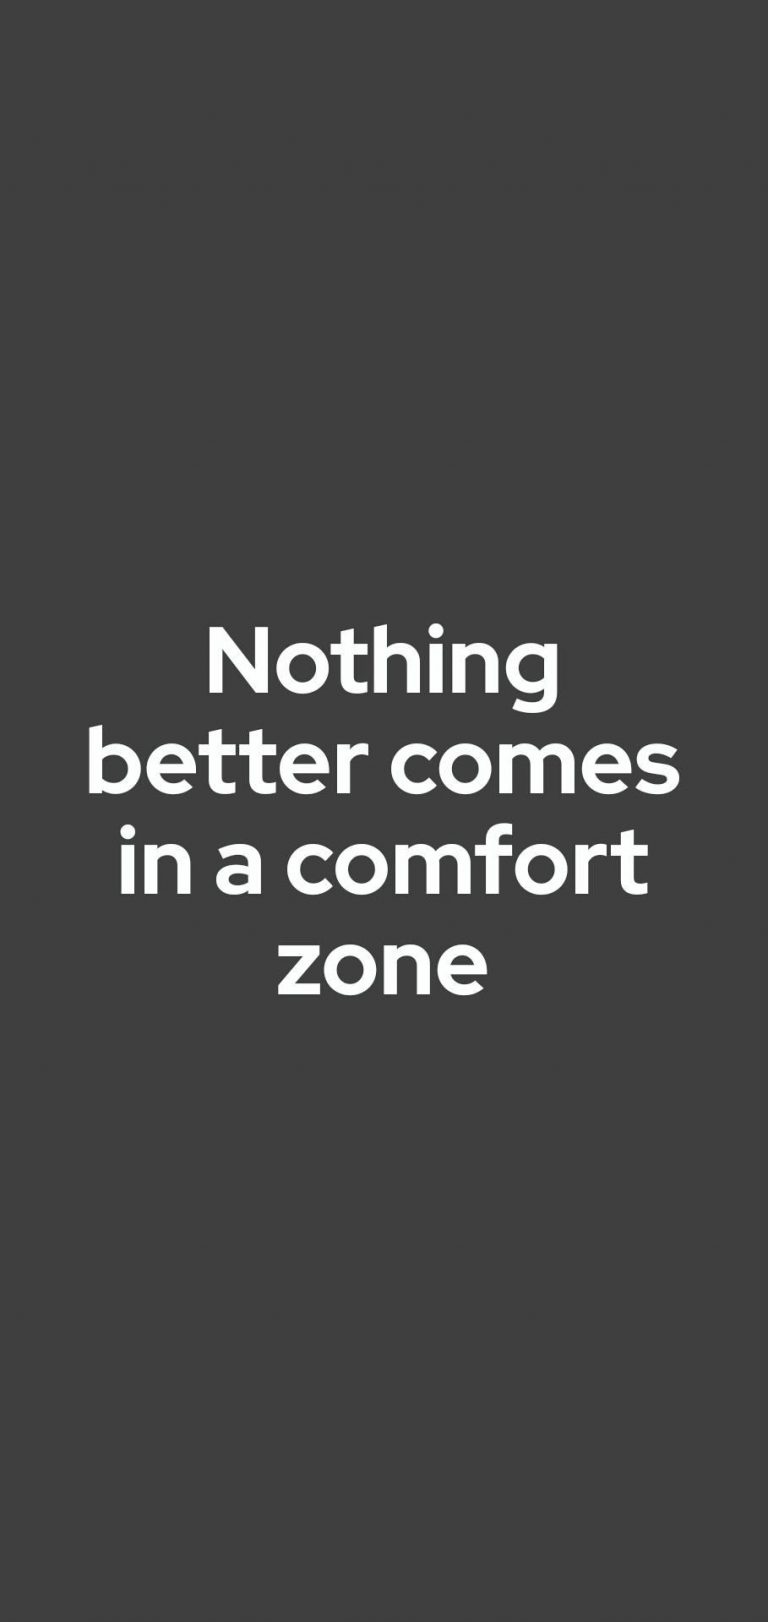 Nothing Better Comes In a Comfort Zone Wallpaper